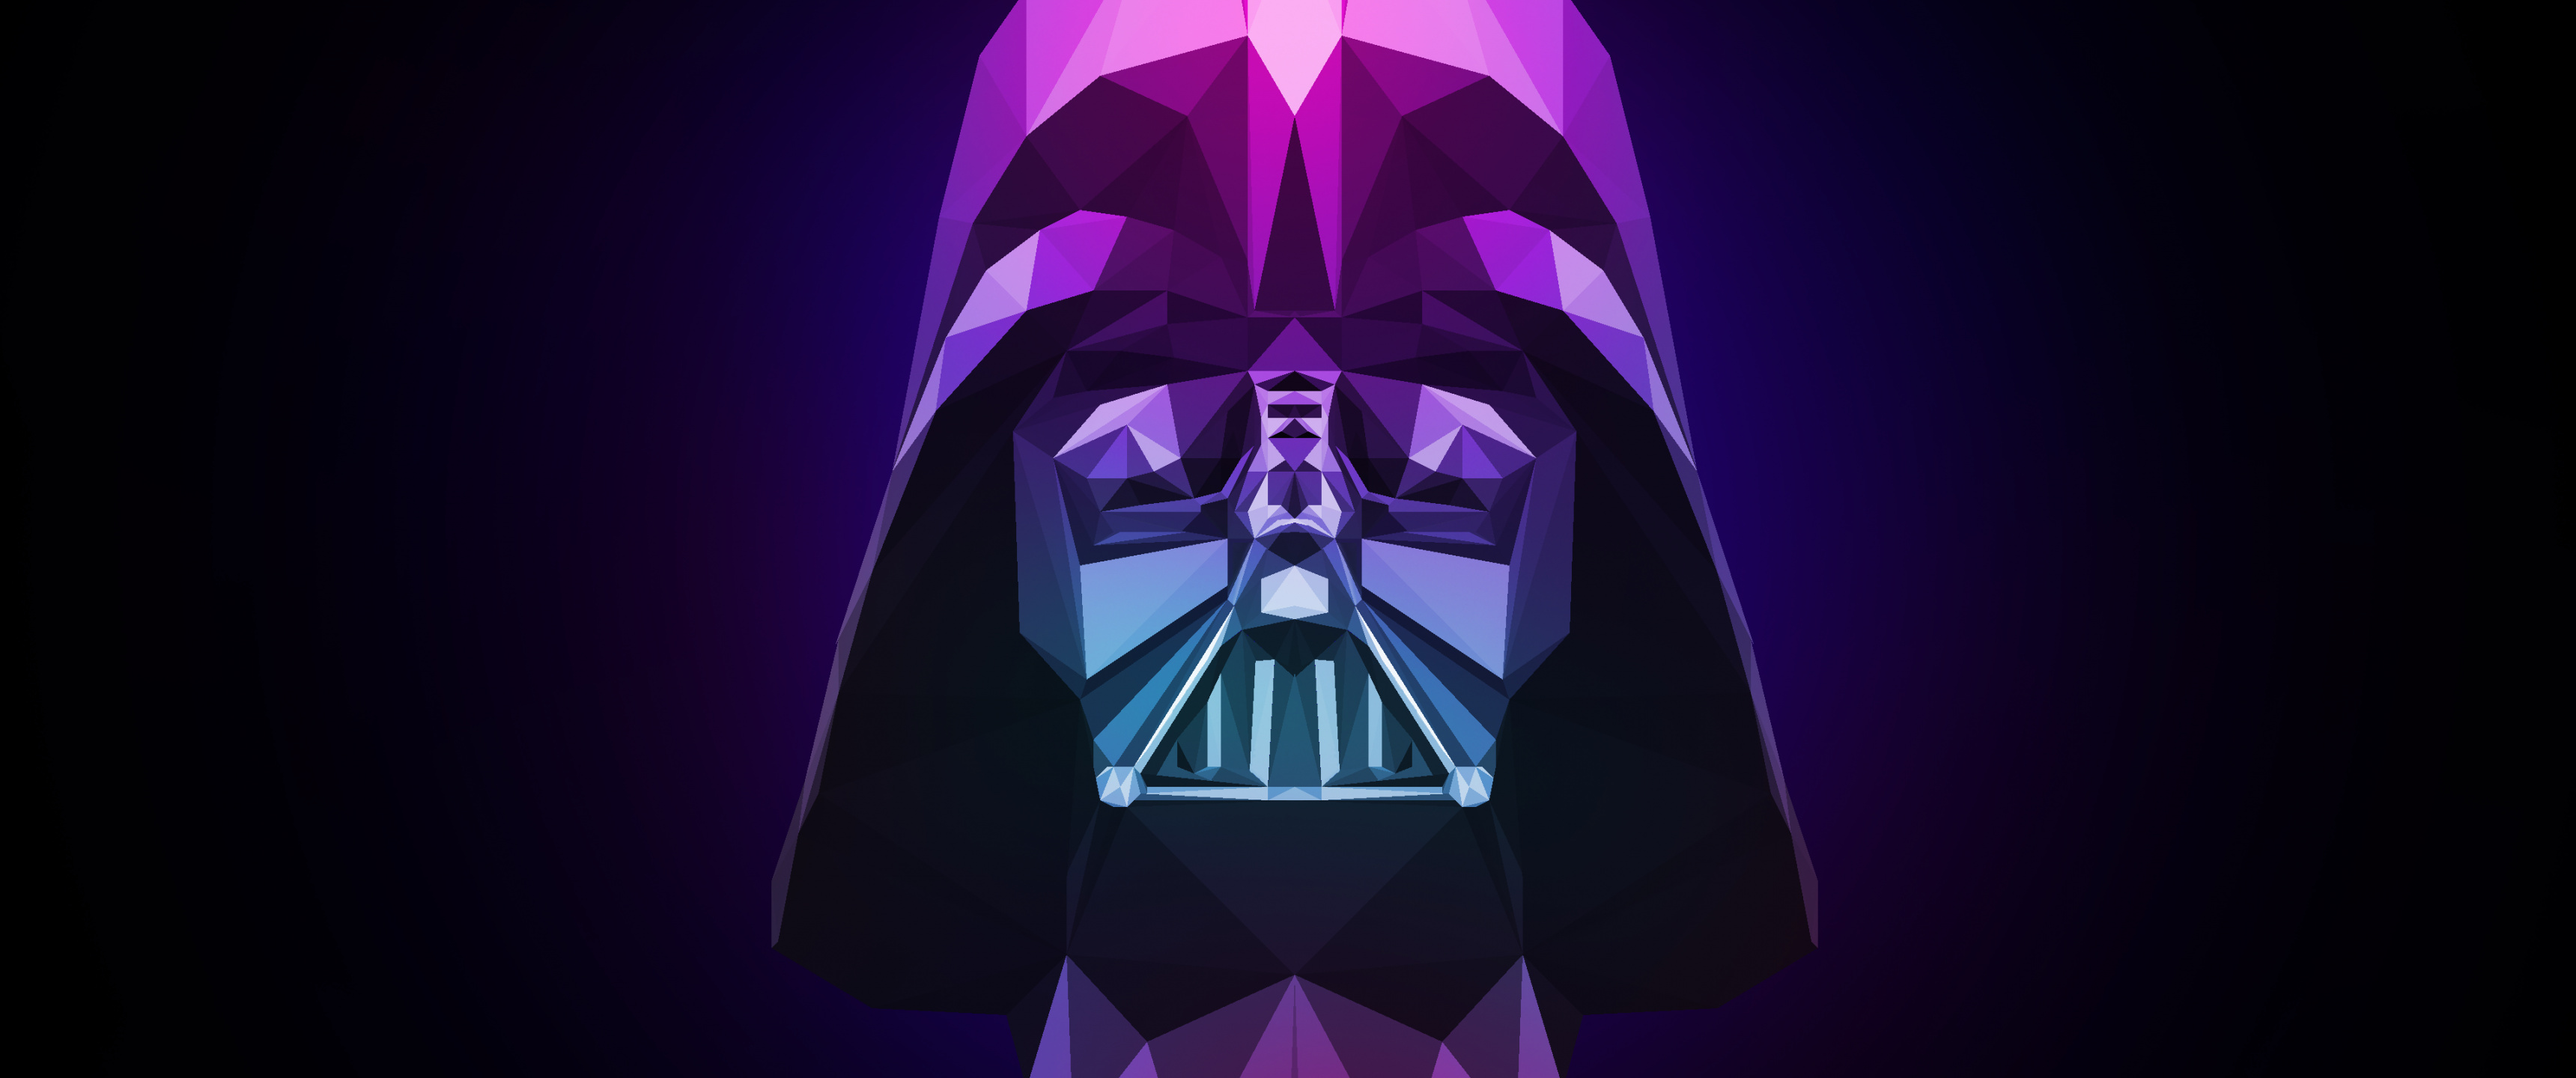 Darth Vader: The biological father of Princess Leia and Luke Skywalker. 3440x1440 Dual Screen Wallpaper.